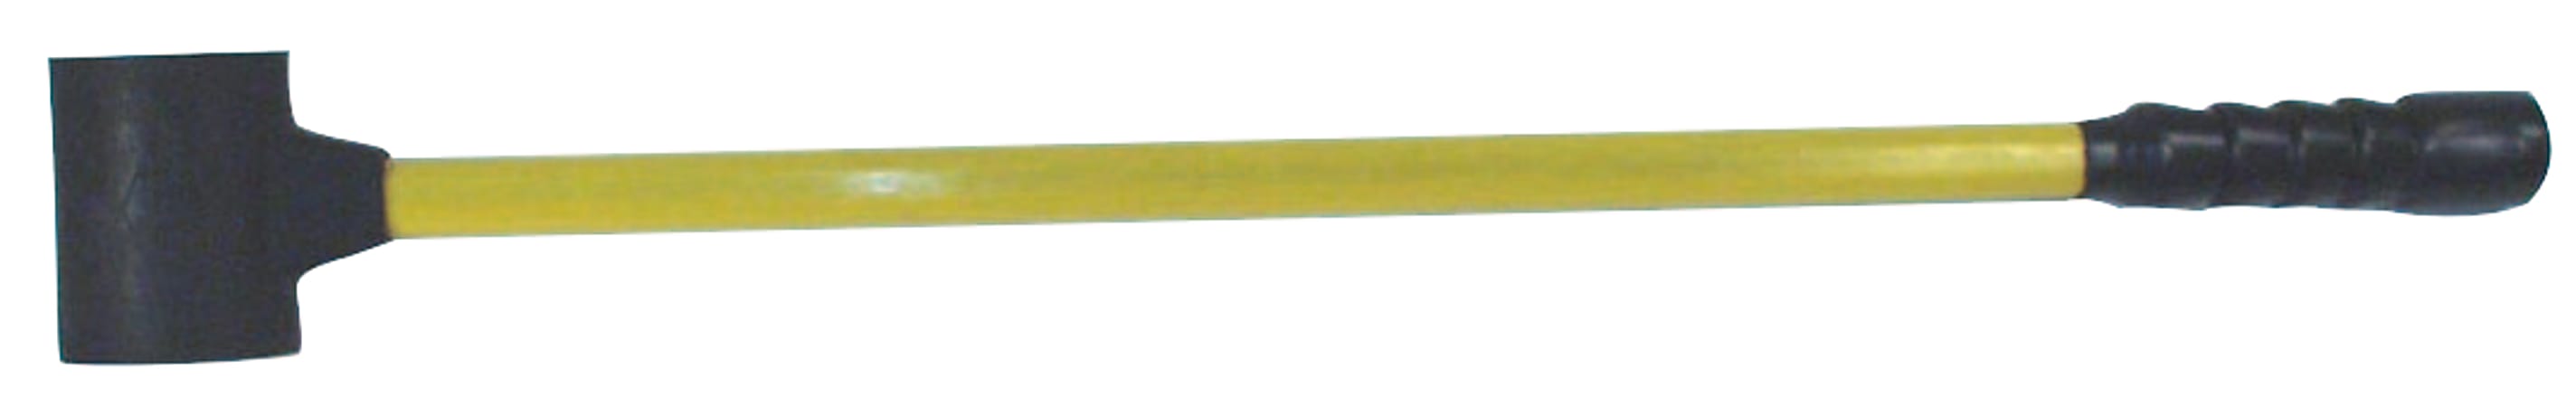 SPS Composite Soft Face Hammers, 1 1/2 lb Head, 2 in Dia., Yellow